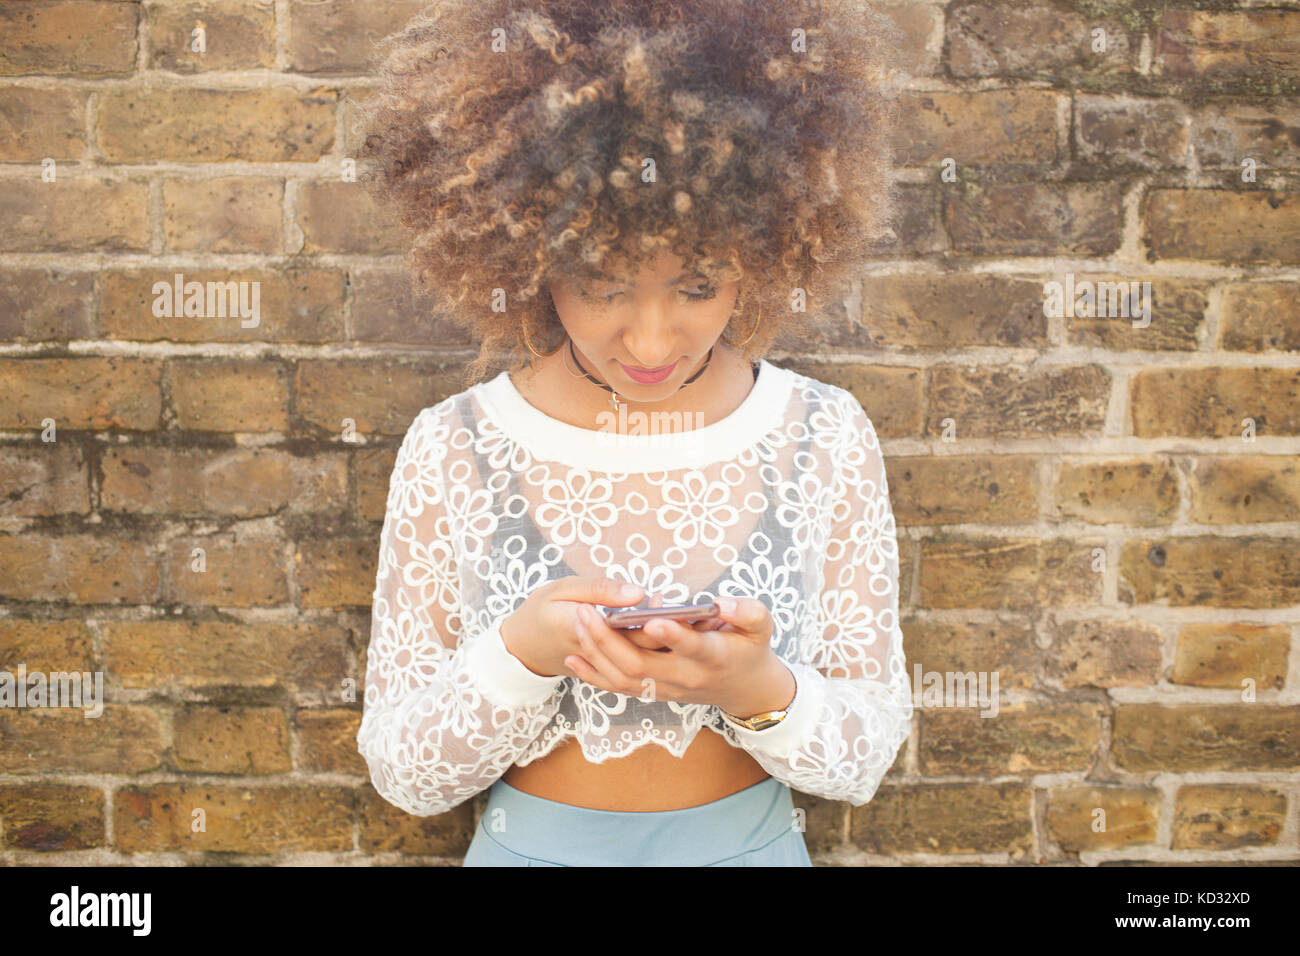 Young woman leaning against wall, using smartphone Banque D'Images